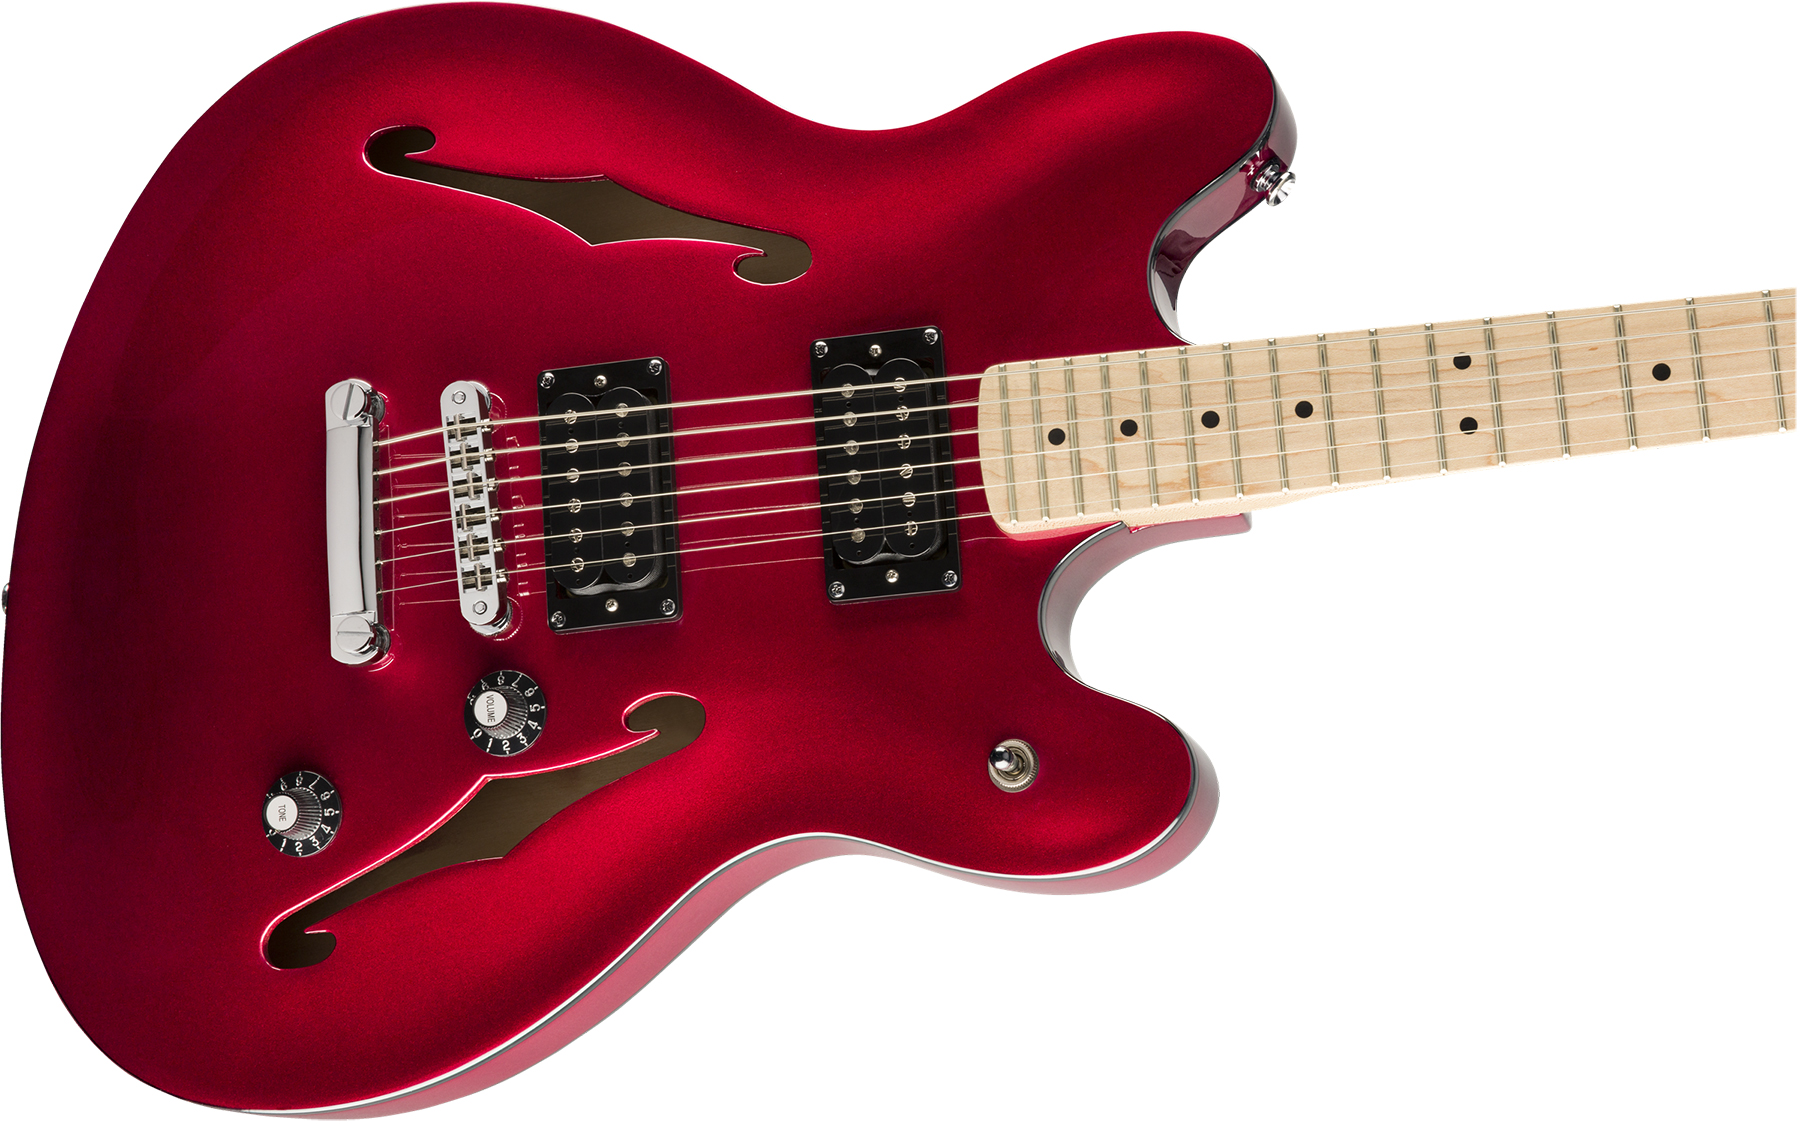 Squier Starcaster Affinity 2019 Hh Ht Mn - Candy Apple Red - Semi-hollow electric guitar - Variation 2